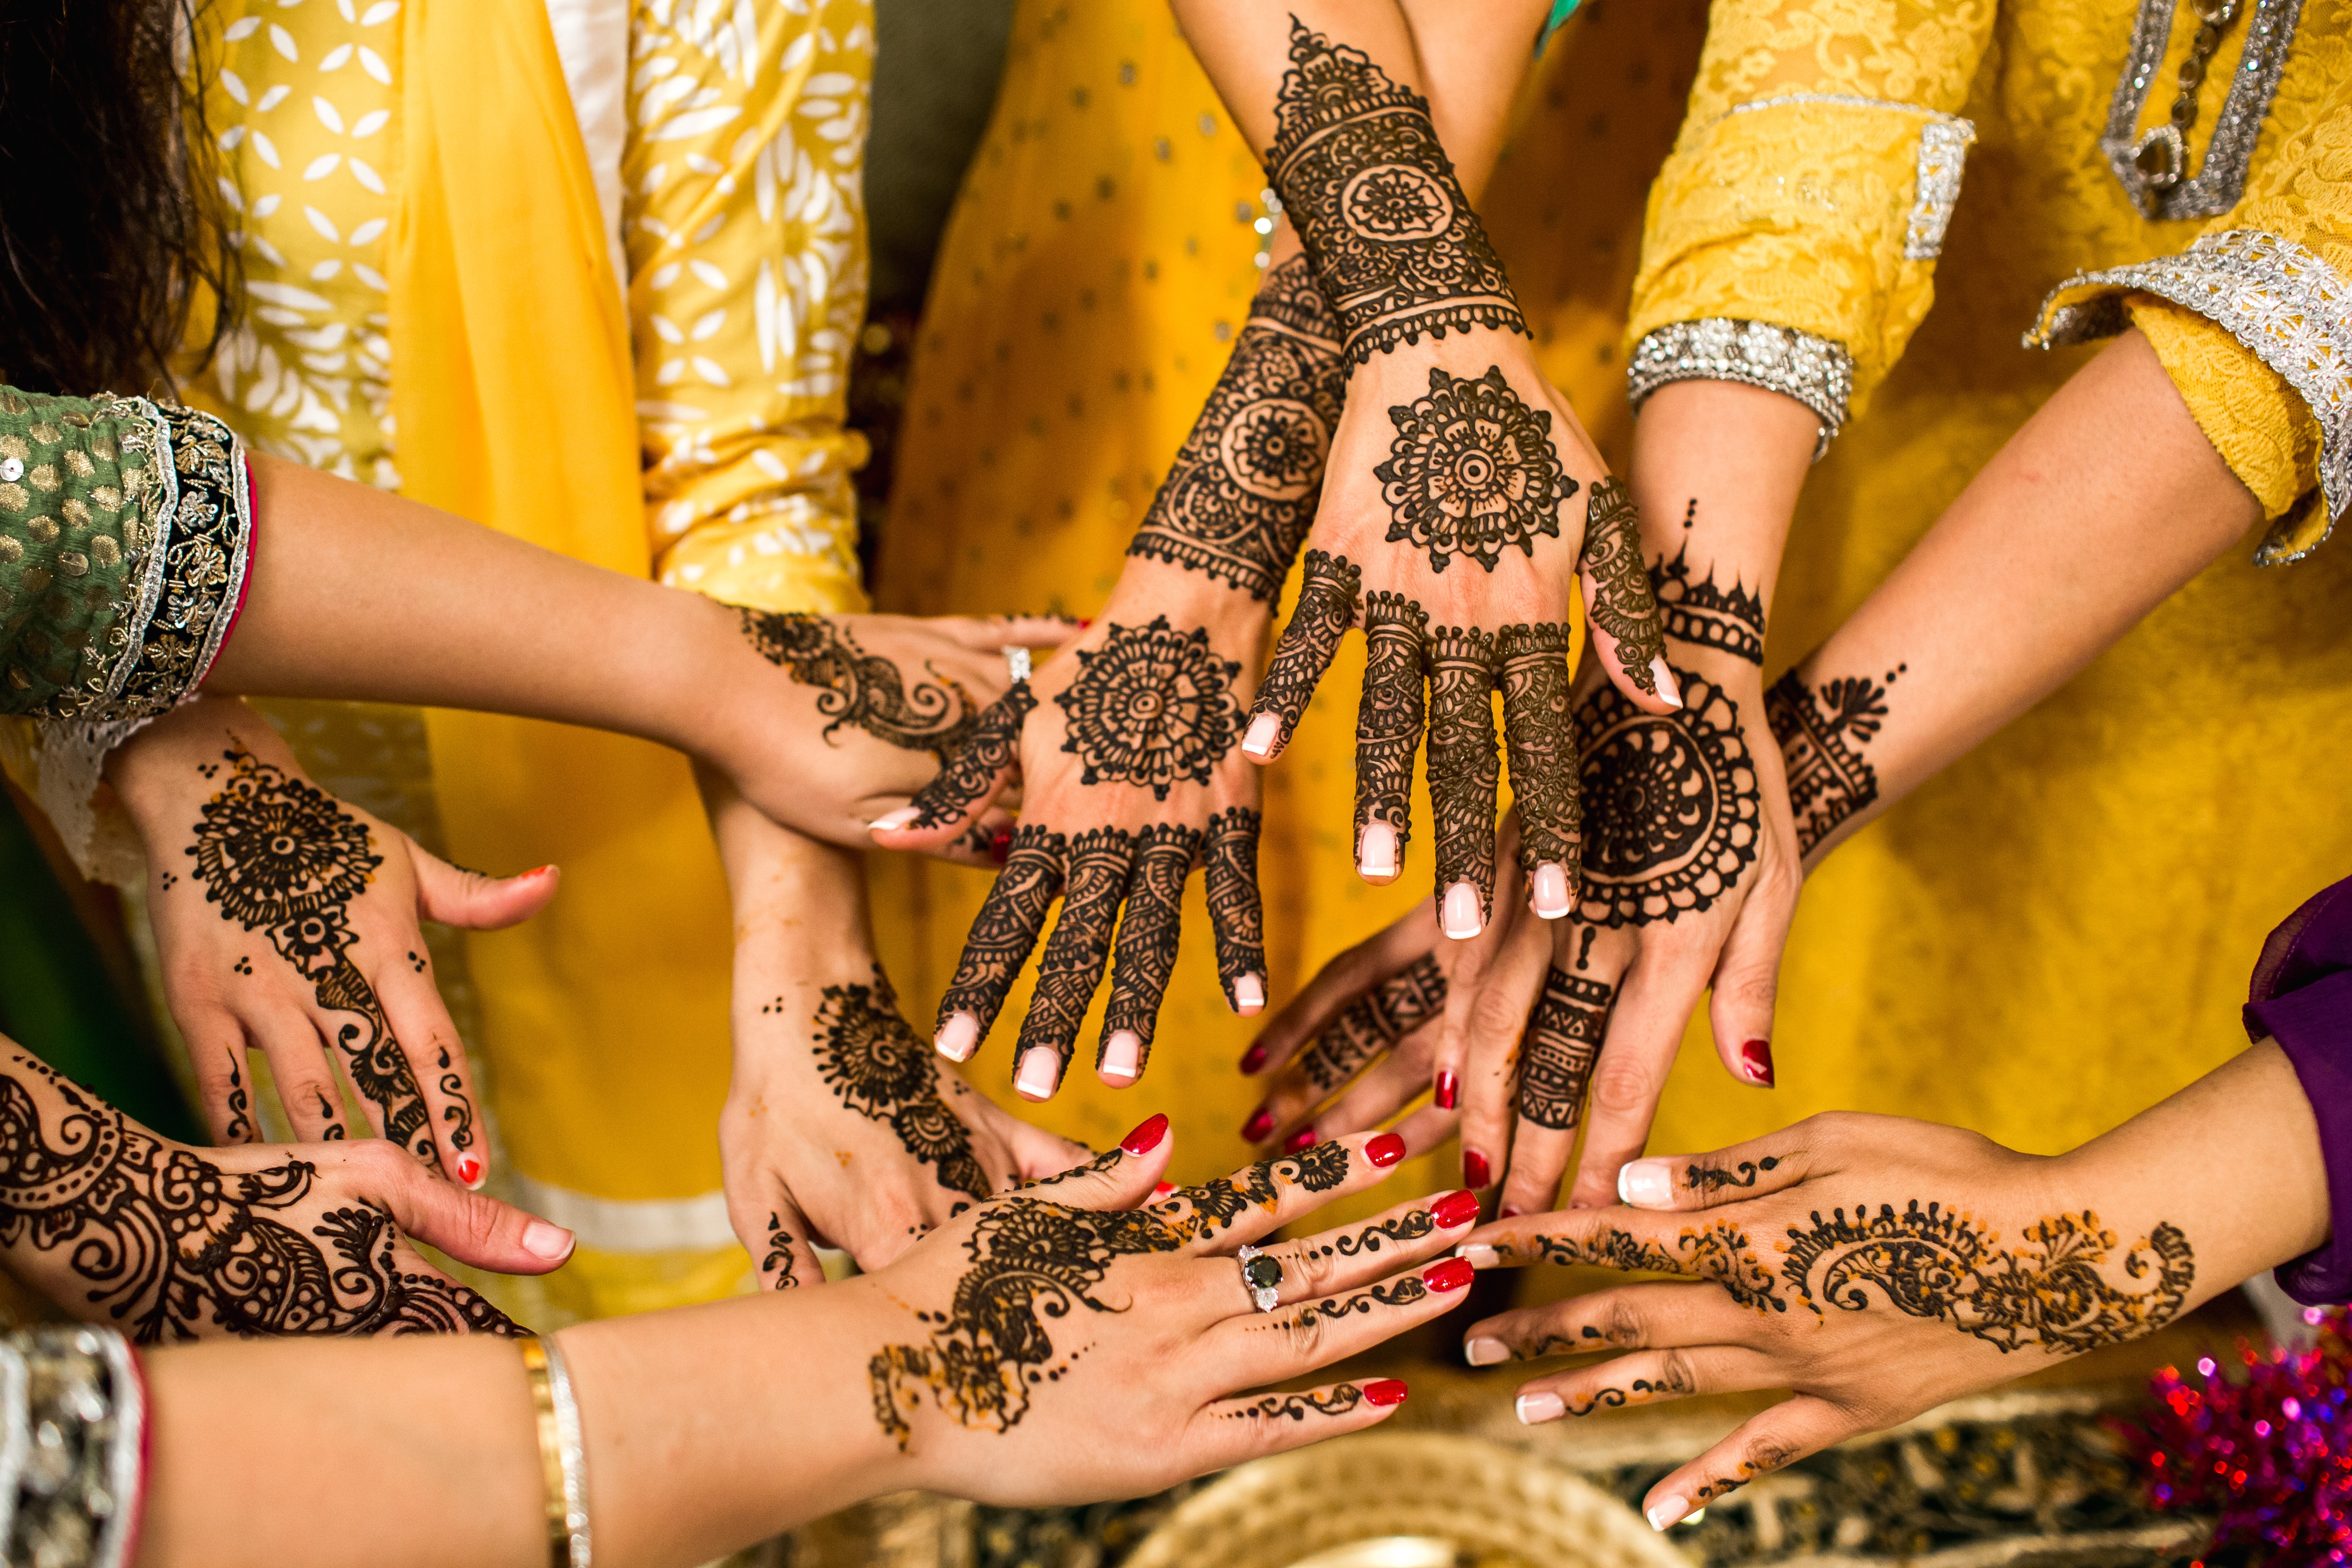 People's hands with henna.